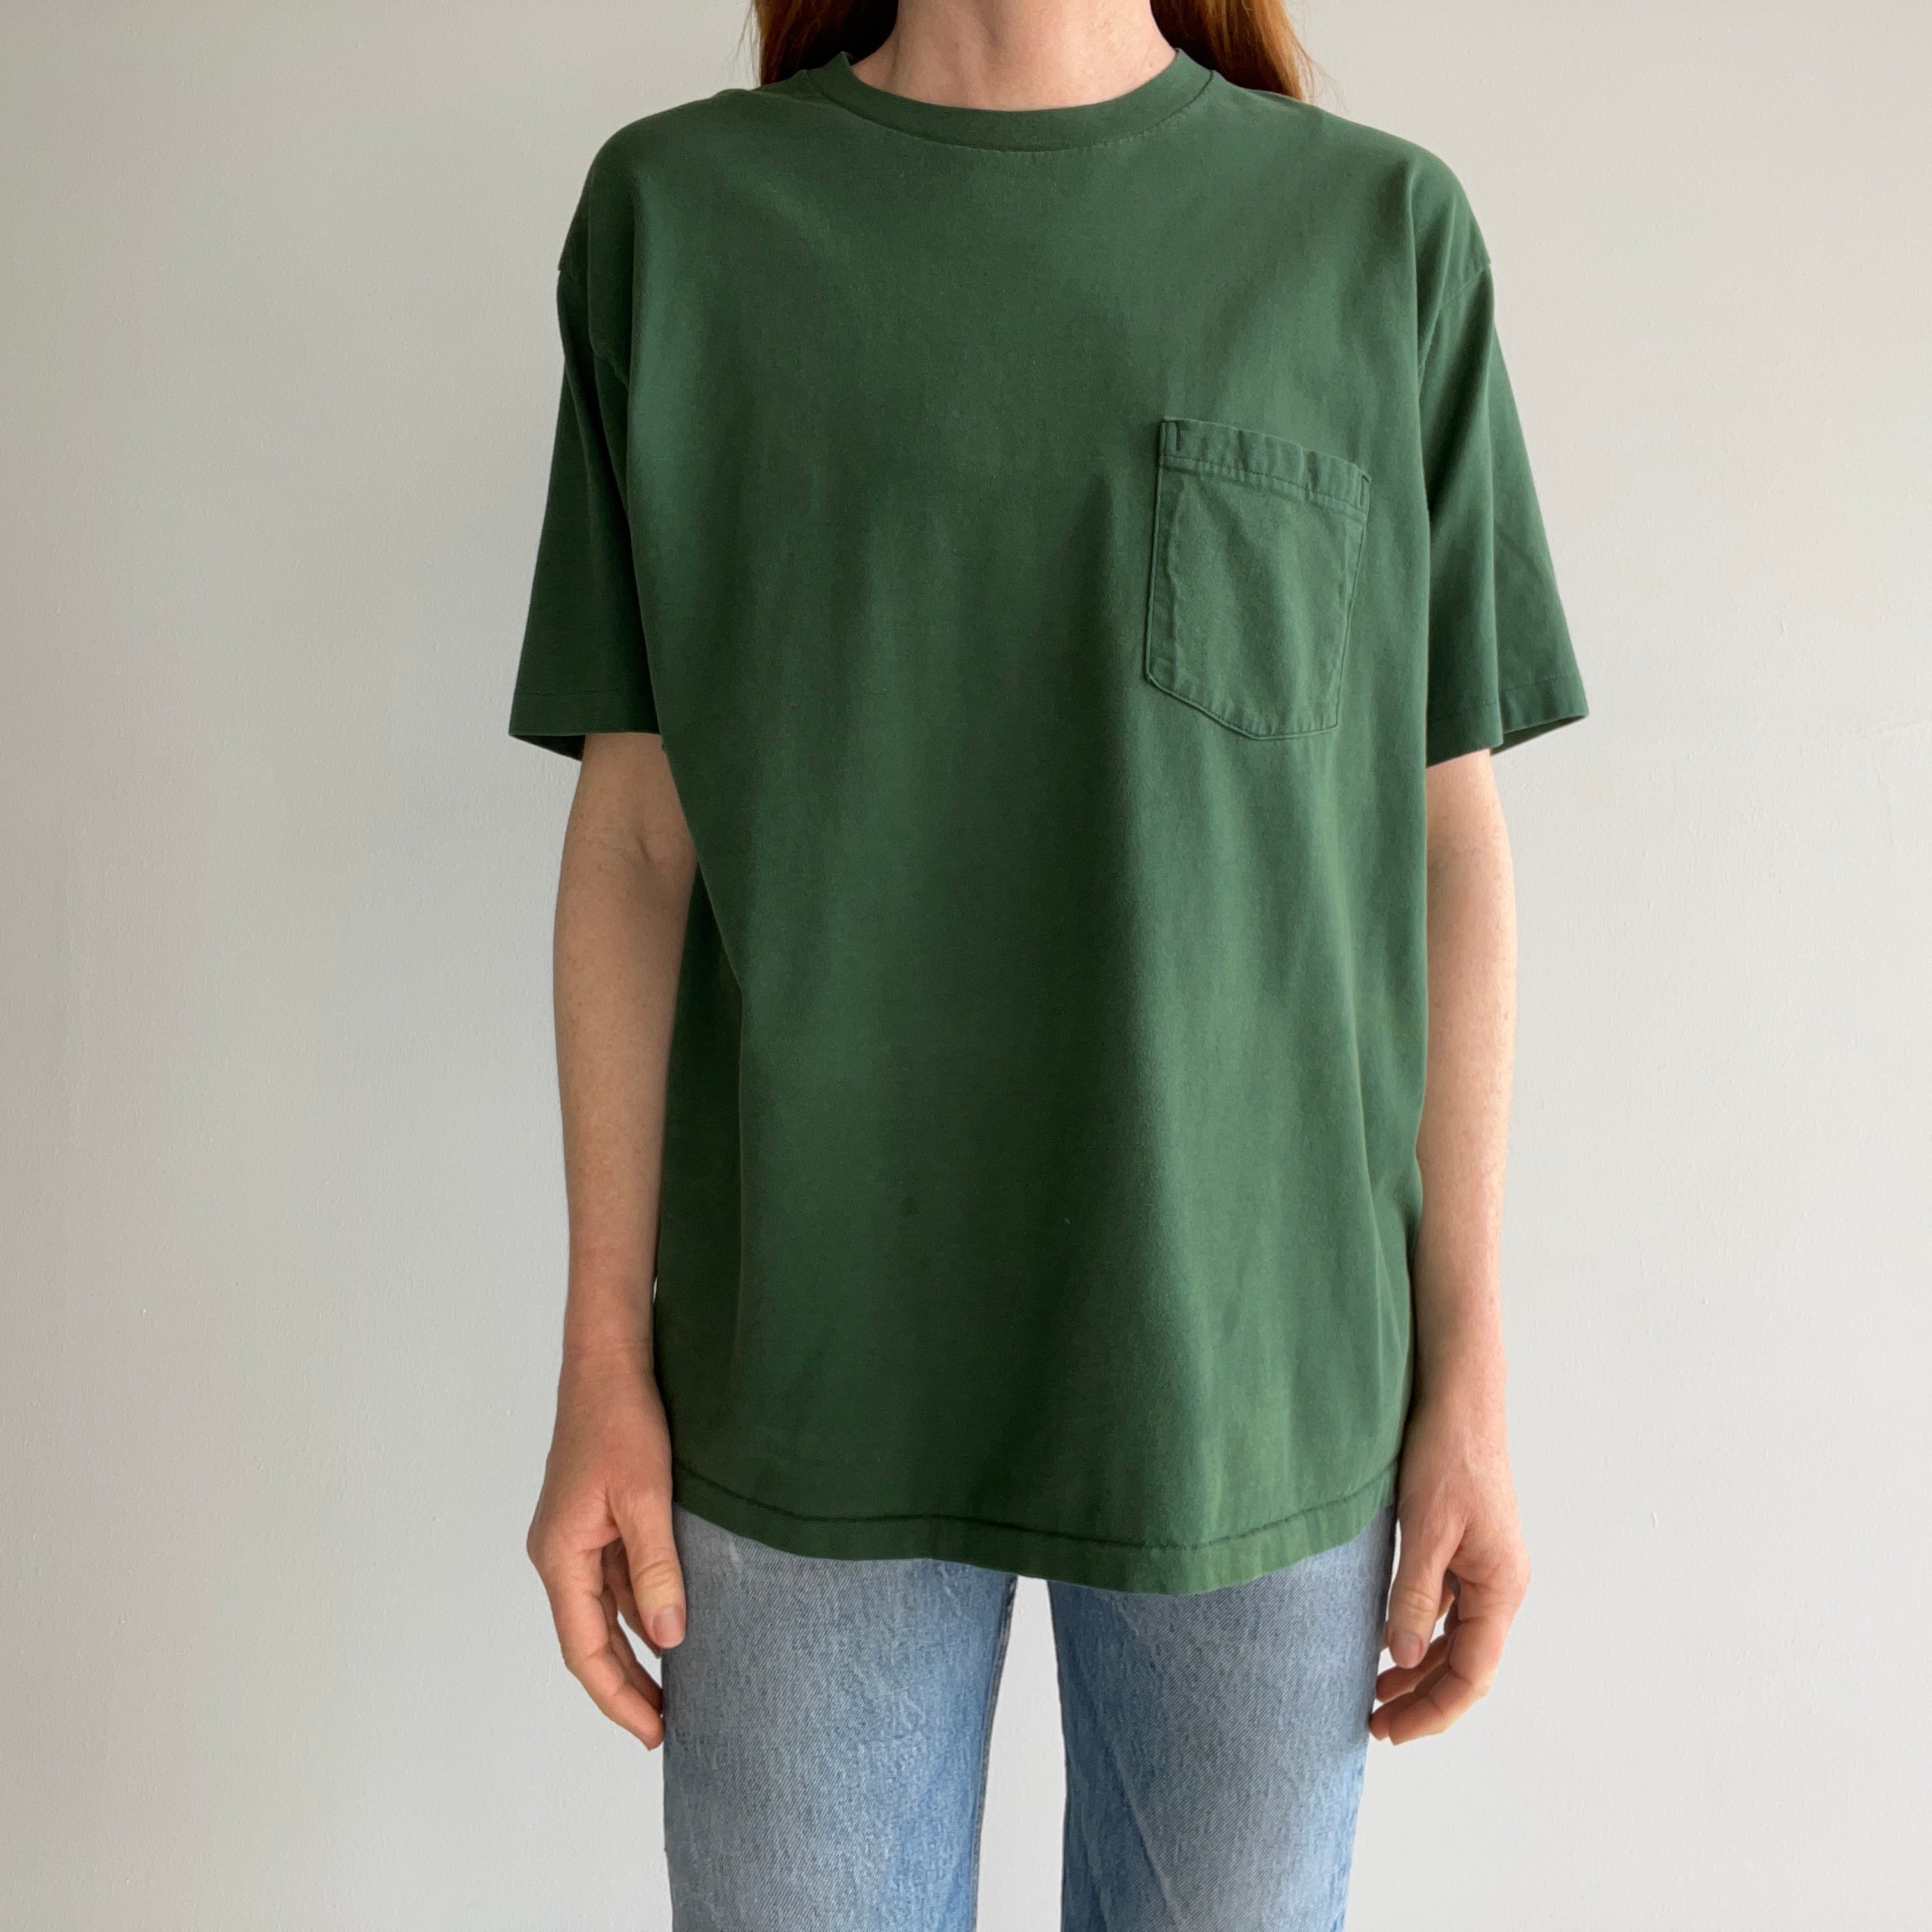 1990s USA Made Gap Pocket T-Shirt with Extreme Fading at the Pits